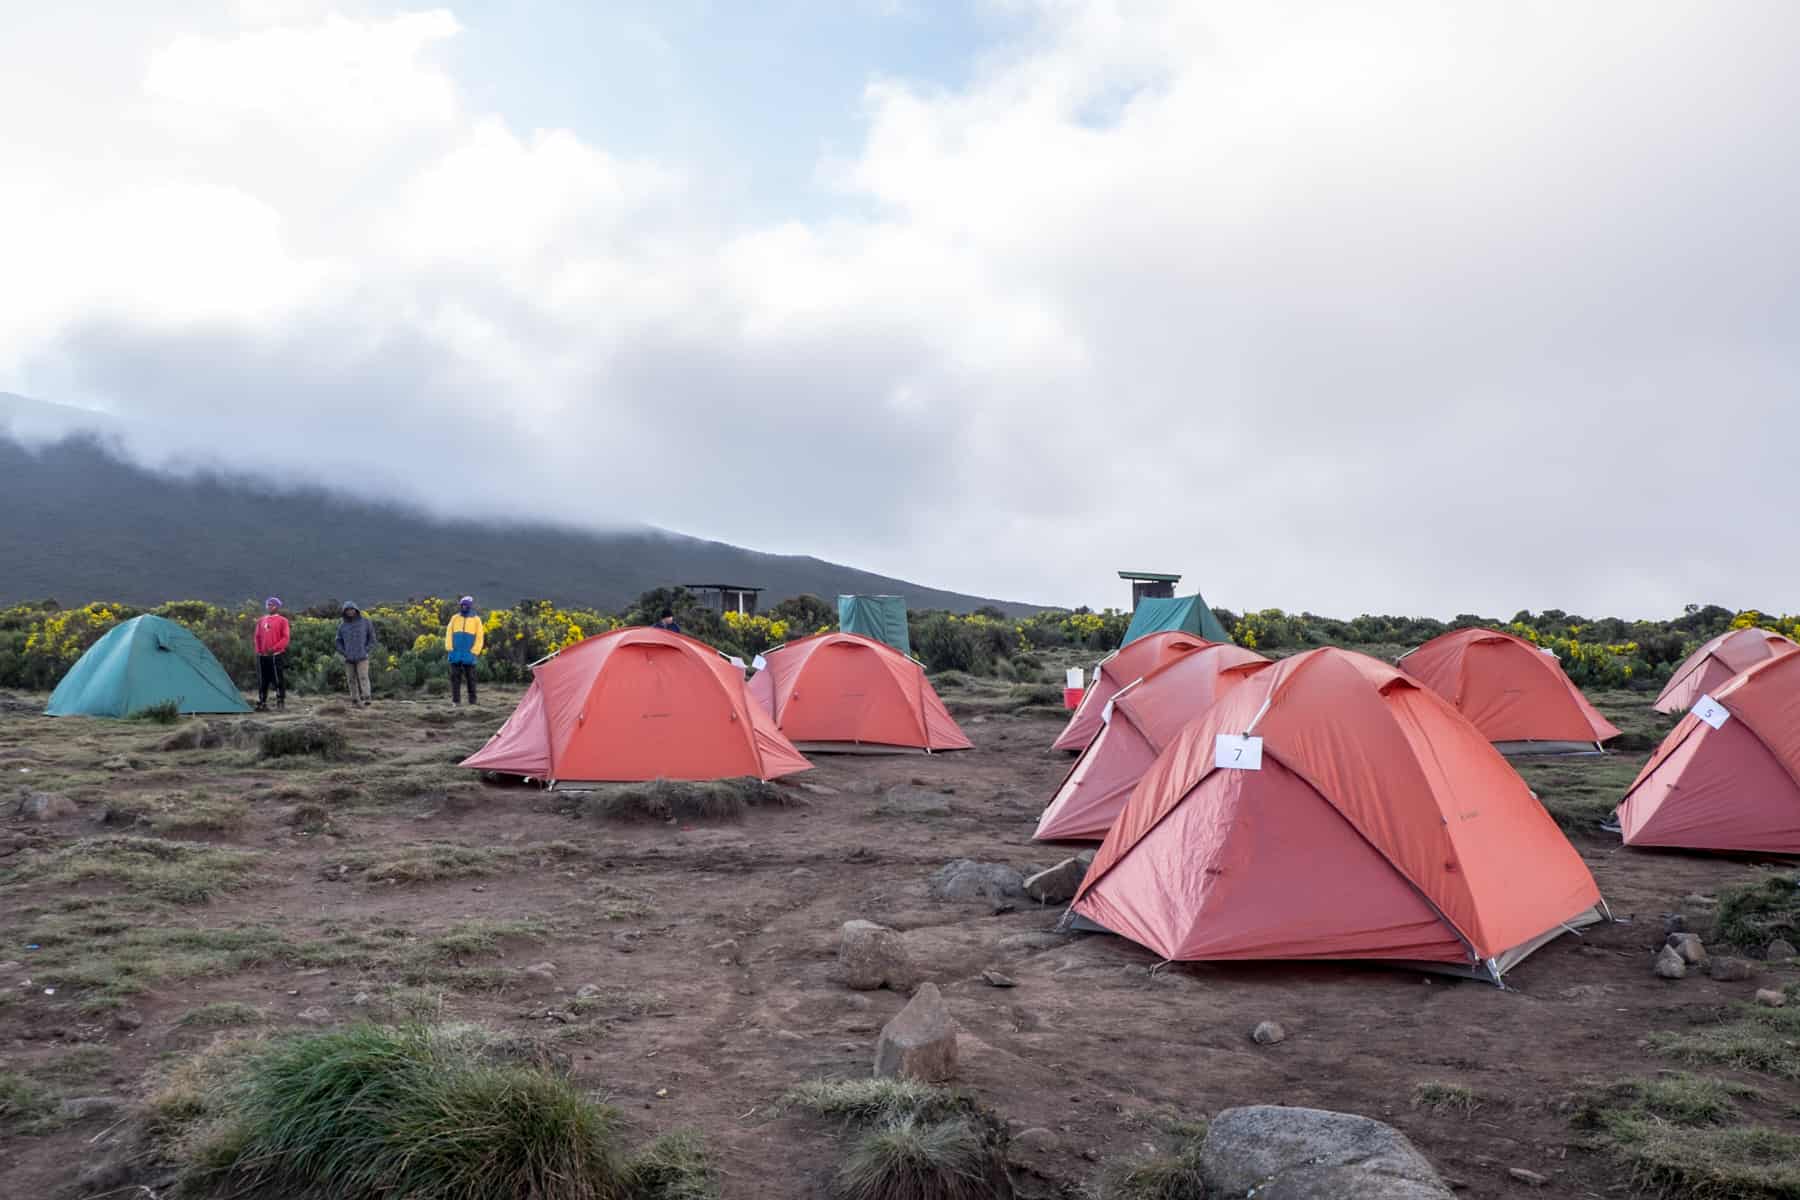 A small collective of orange tents on the barren brown earth of Mount Kilimanjaro